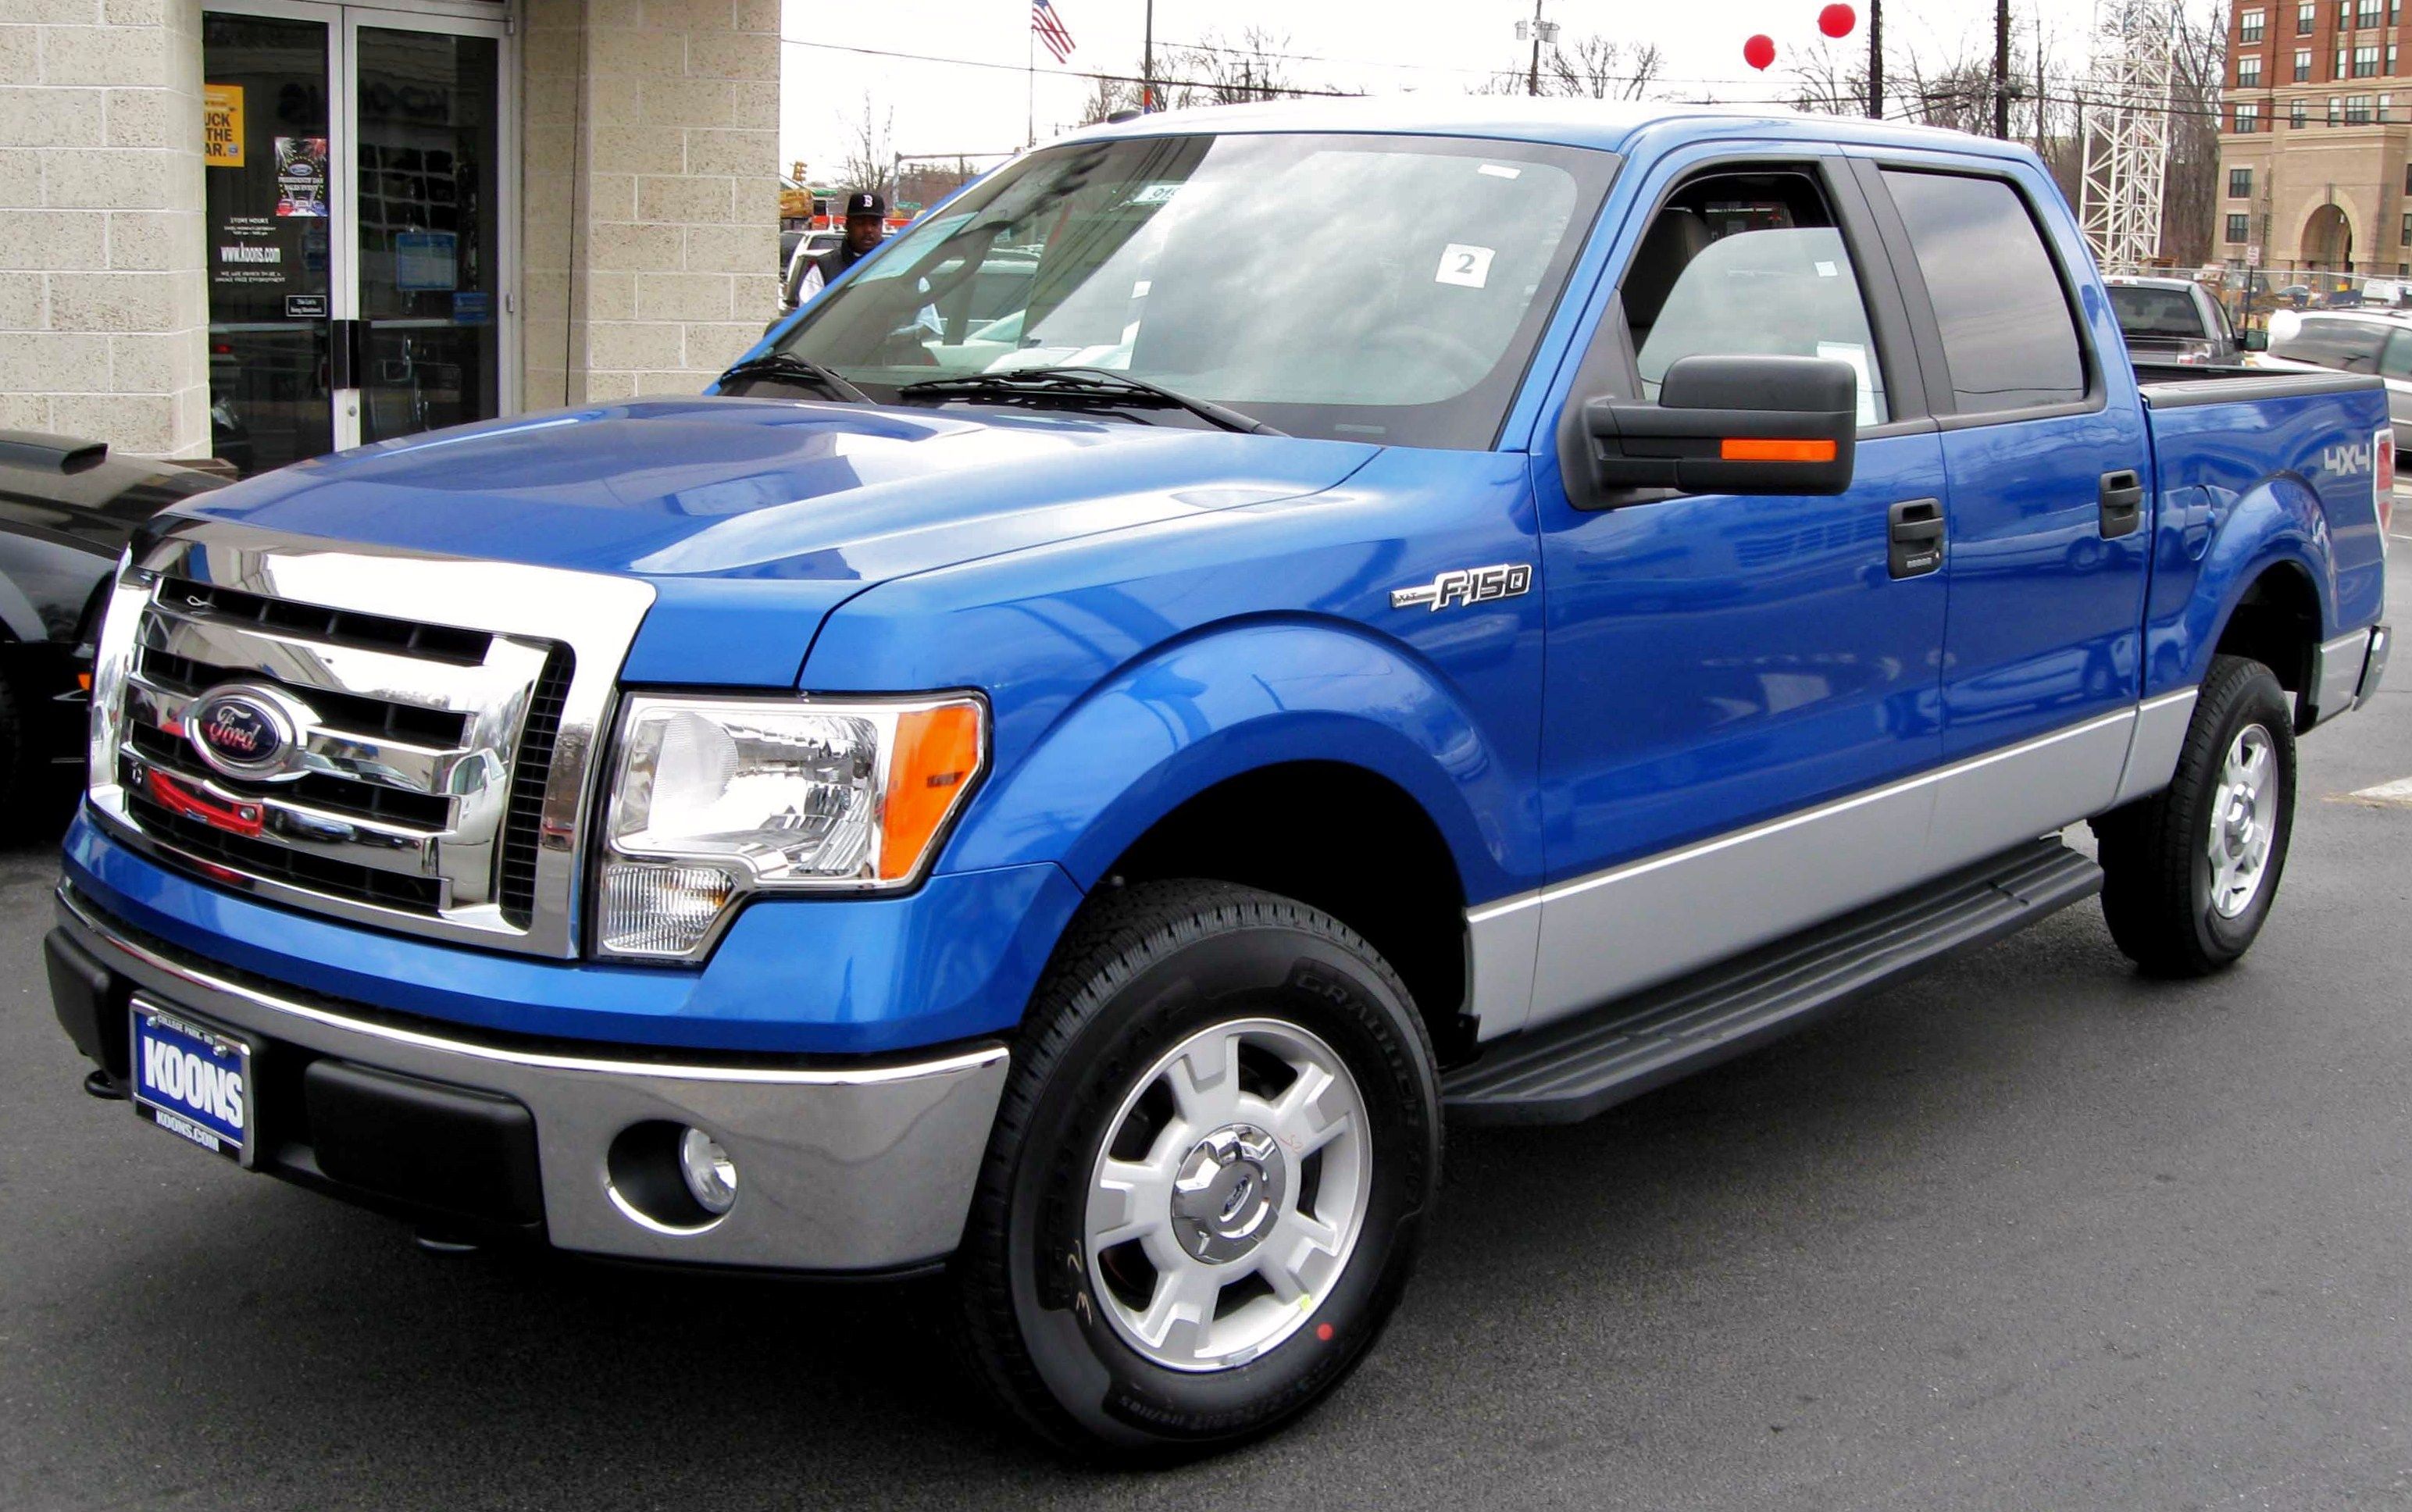 The 2009 Ford F-150 XLT on sale.